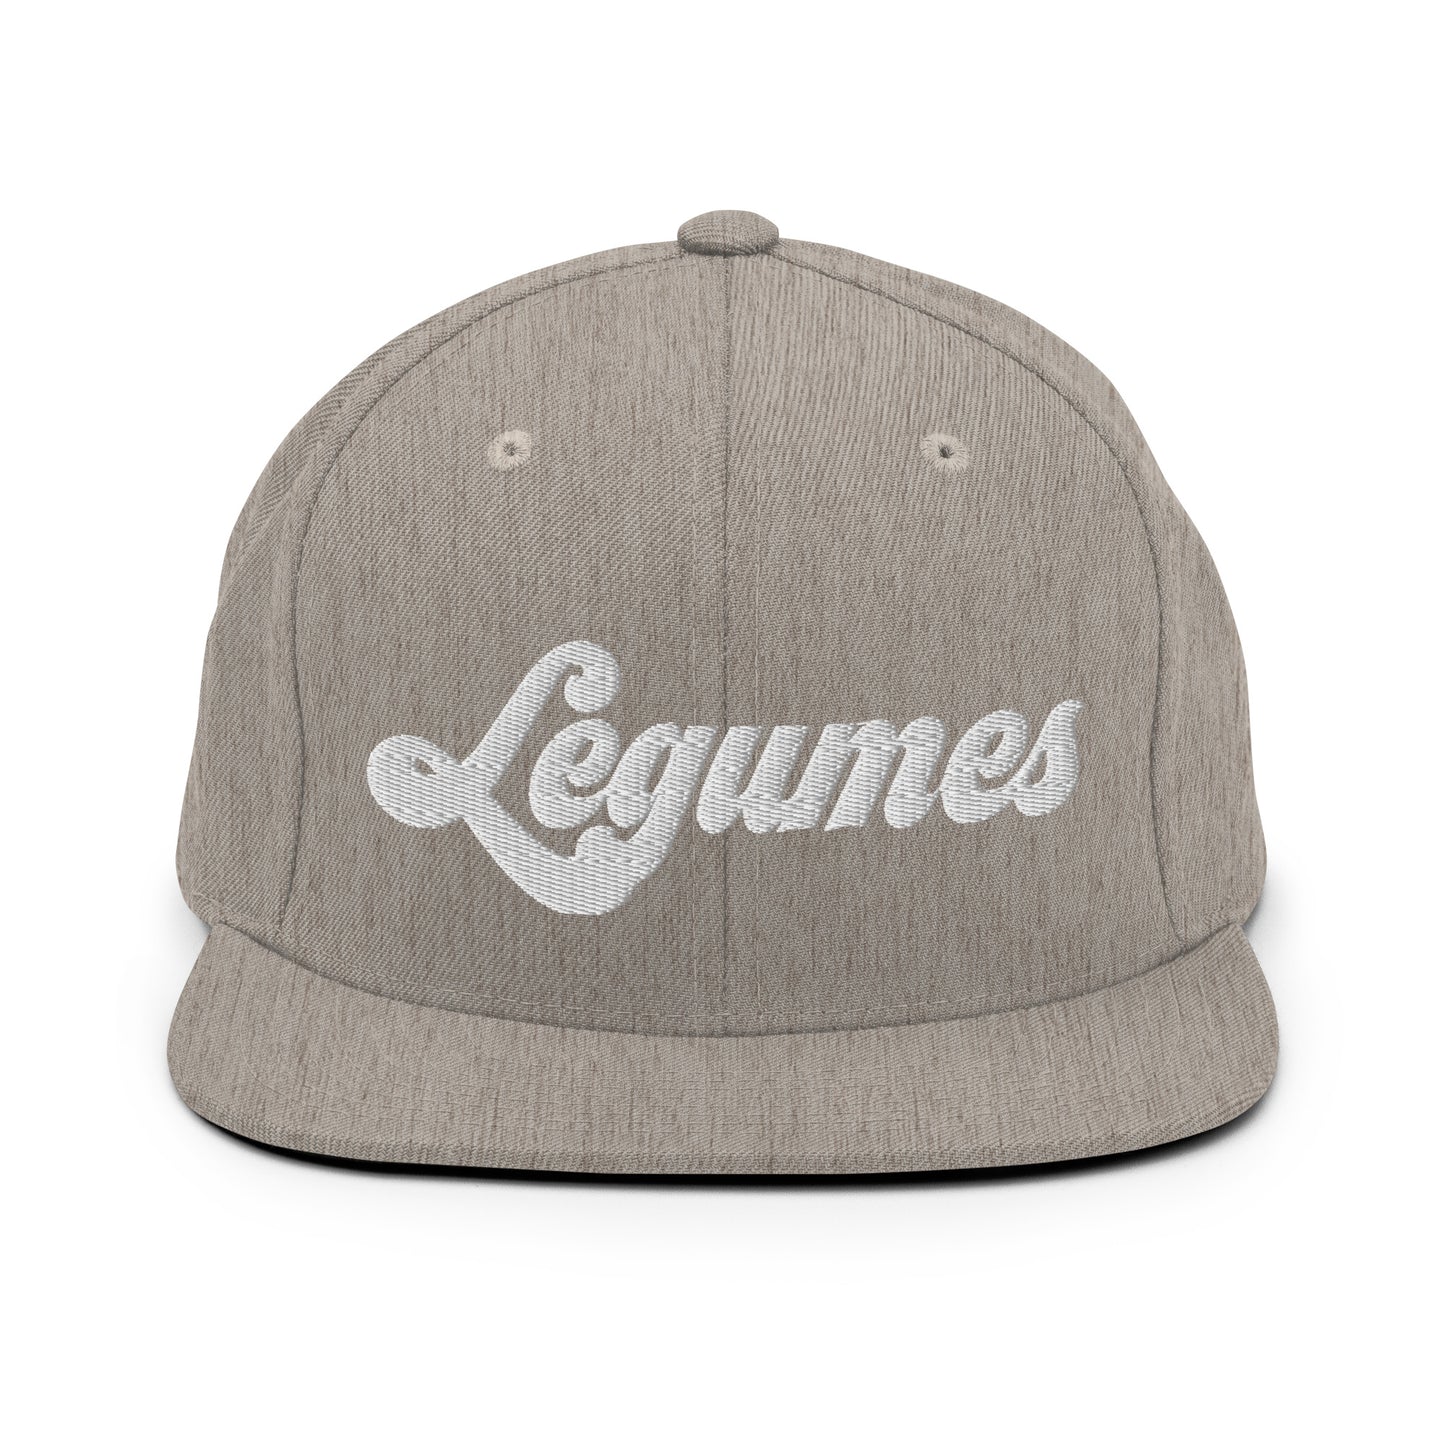 Legumes Embroidered Snapback Hat